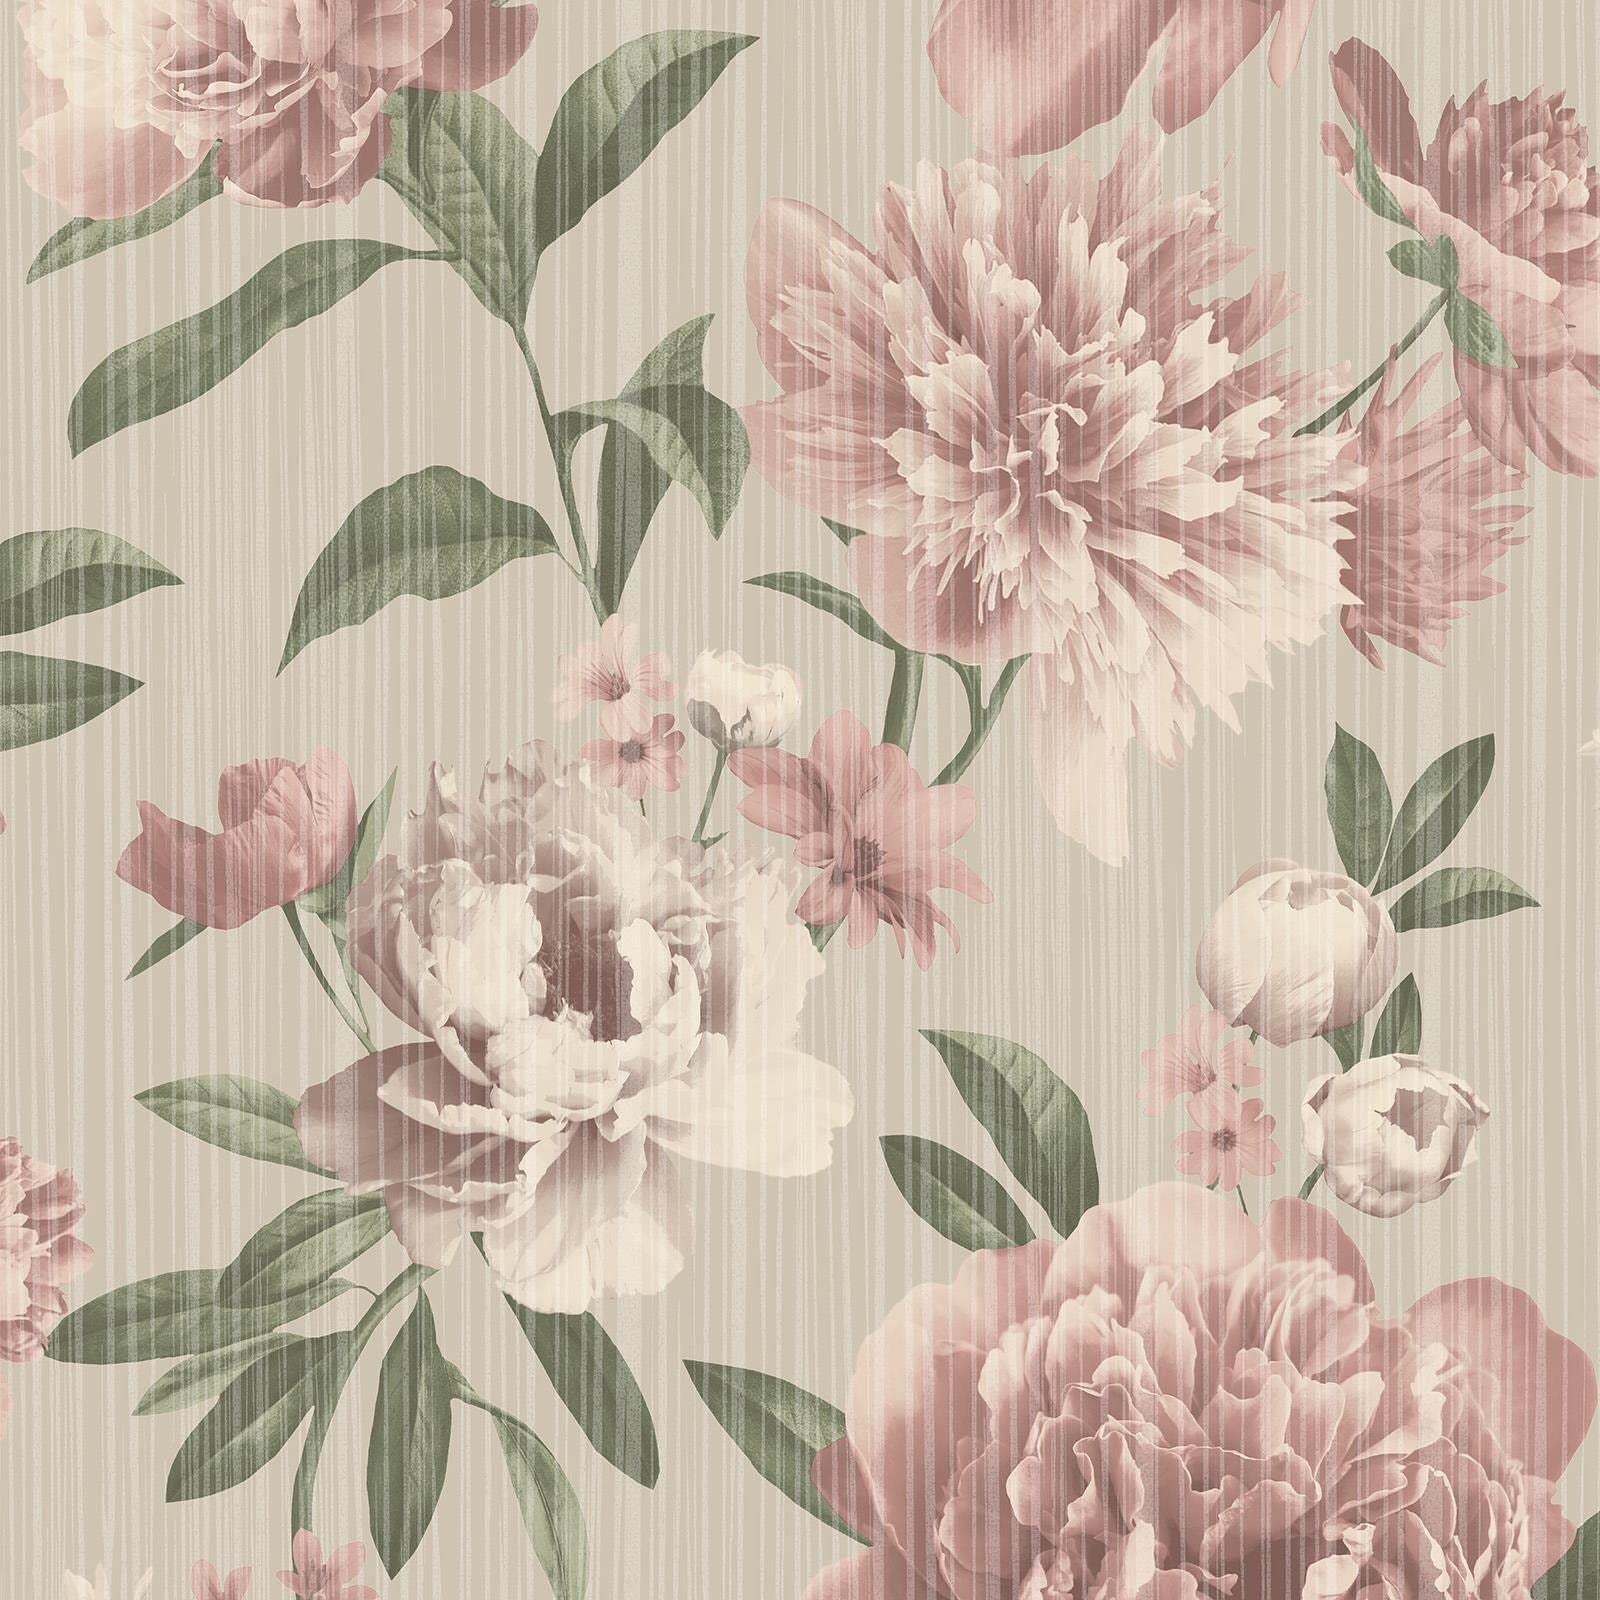 RASCH (U.K) Limited Valentina Big Bloom Wallpaper - Modern Wallpaper for Living Room, Bedroom, Fireplace - Decorative Luxury Floral Wall Paper with Blooming Flowers & Subtle Glimmers (Pink)